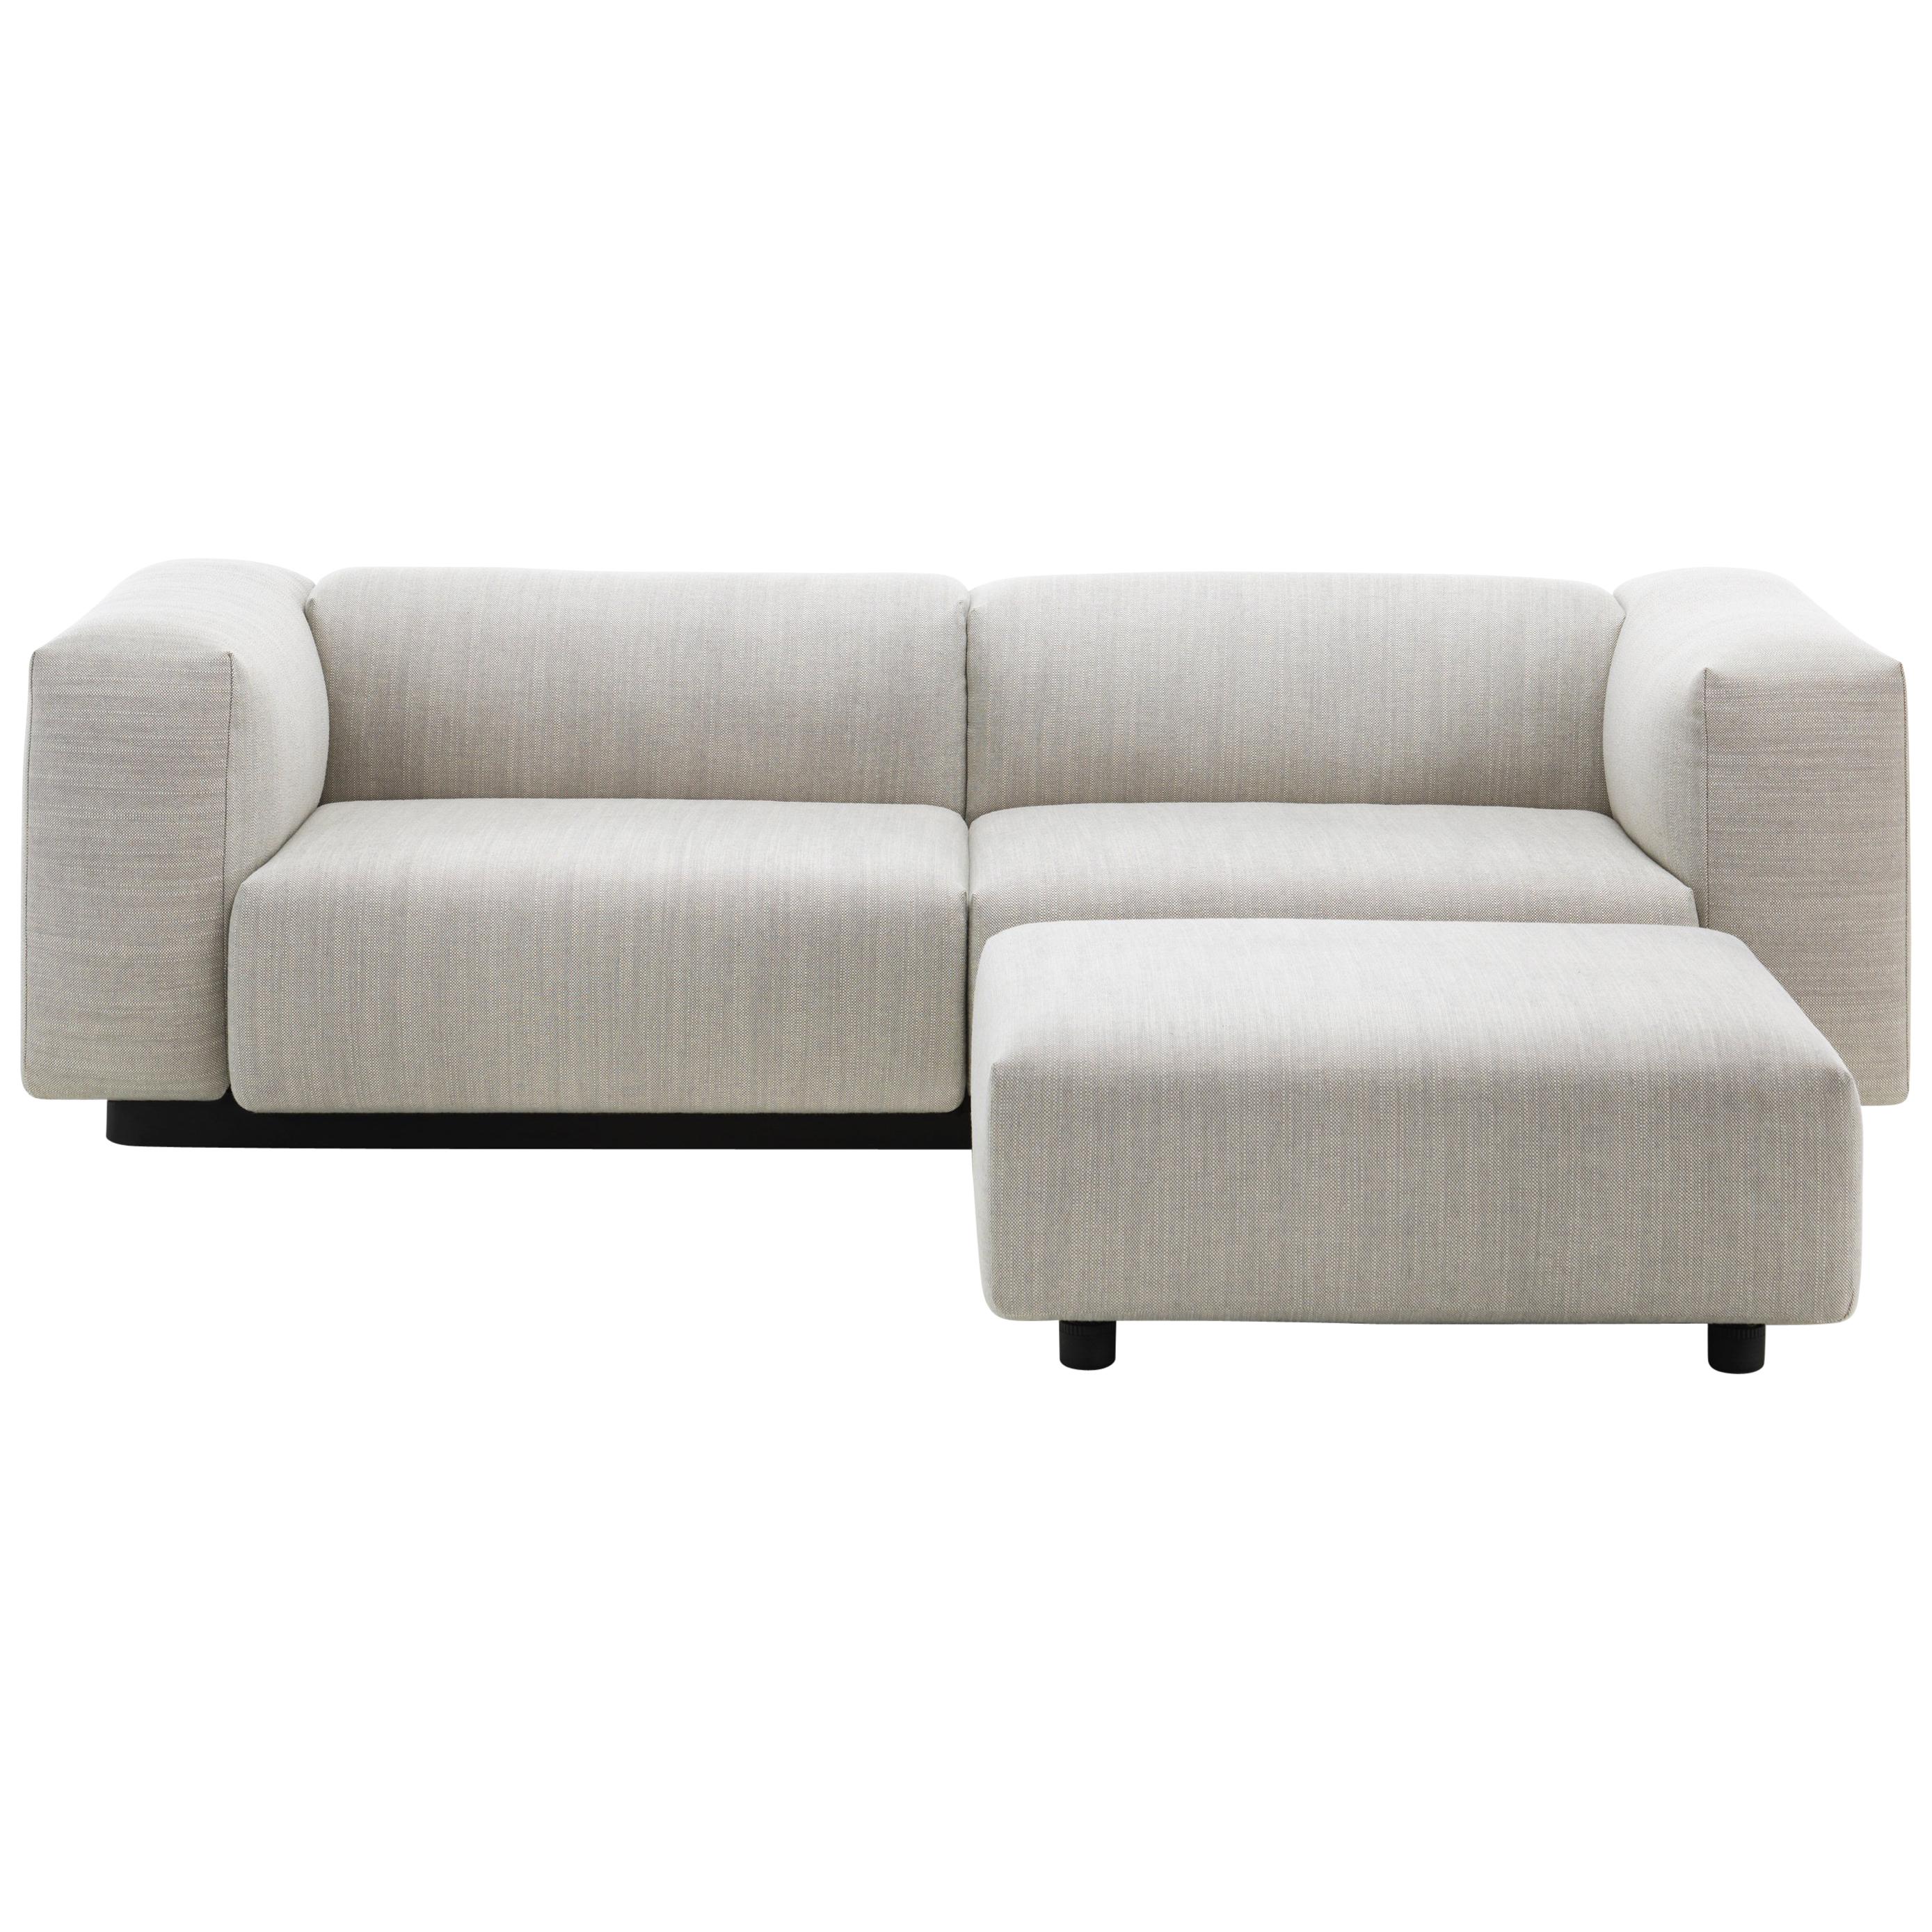 Vitra Soft Modular Two-Seat Sofa in Pearl Reed with Ottoman by Jasper Morrison im Angebot